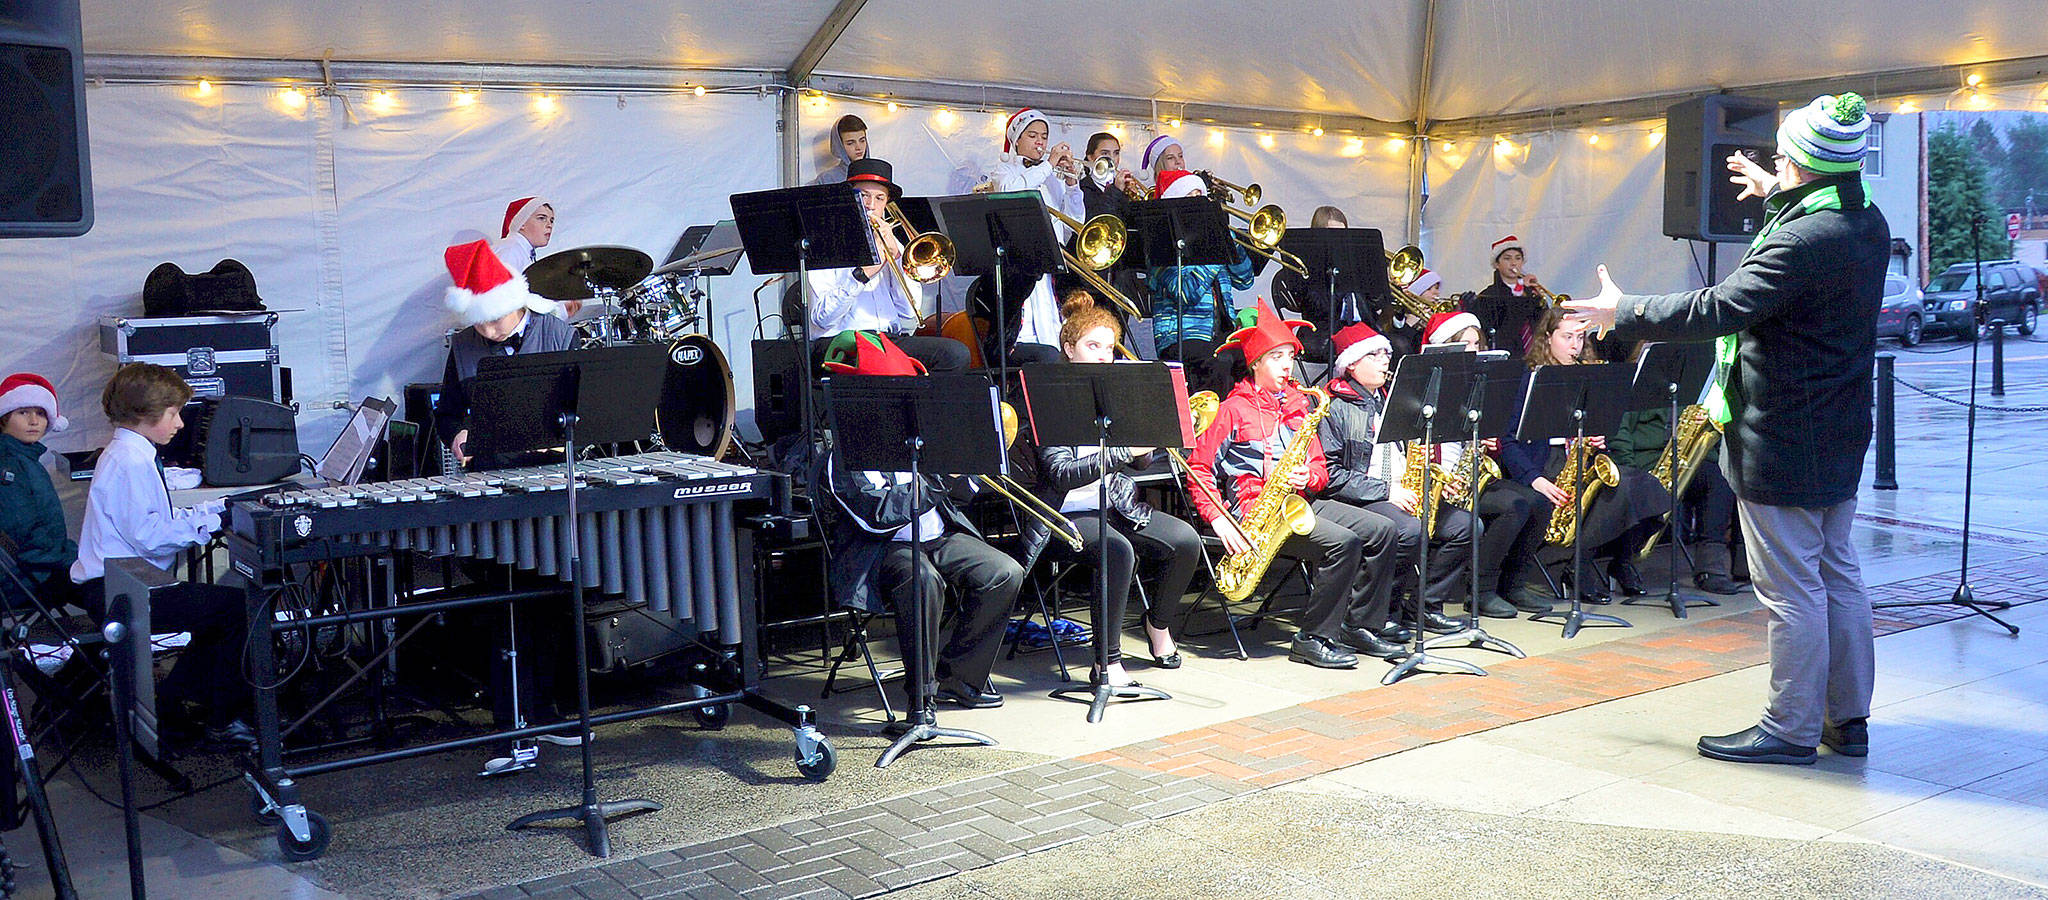 Twin Falls Middle School Jazz Band performs for North Bend’s Holly Days Dec. 2. (Photo courtesy of Mary Miller)